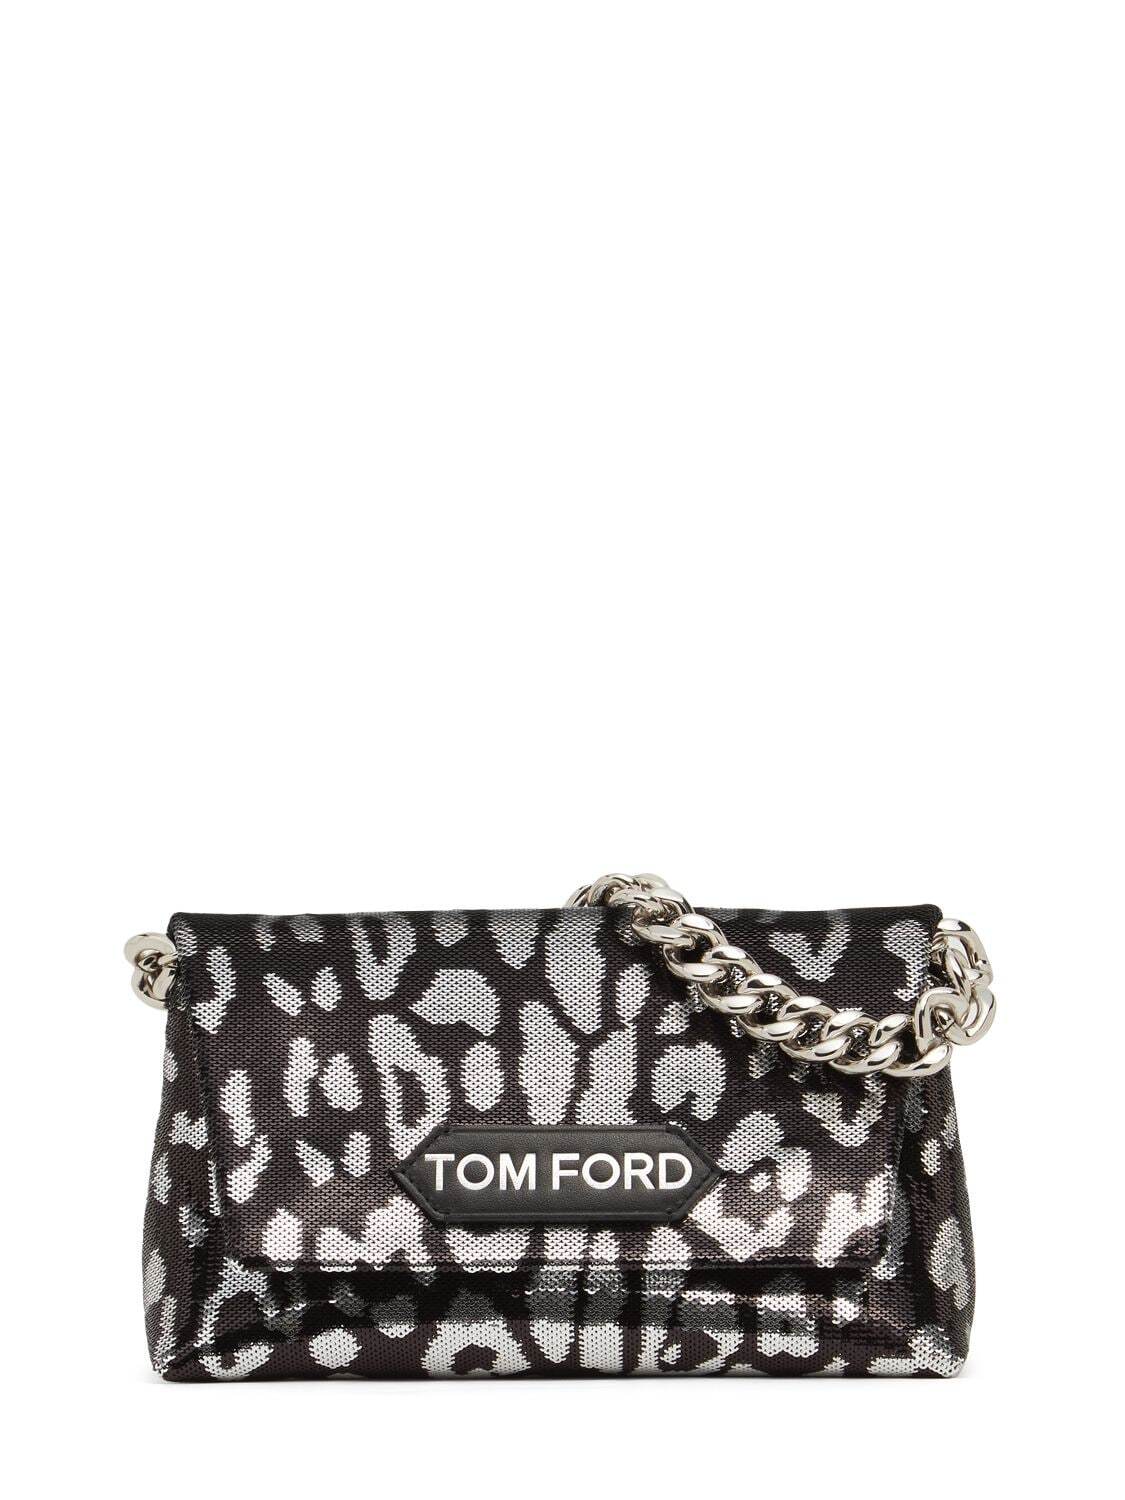 TOM FORD Mini Sequined Shoulder Bag W/chain in black / silver